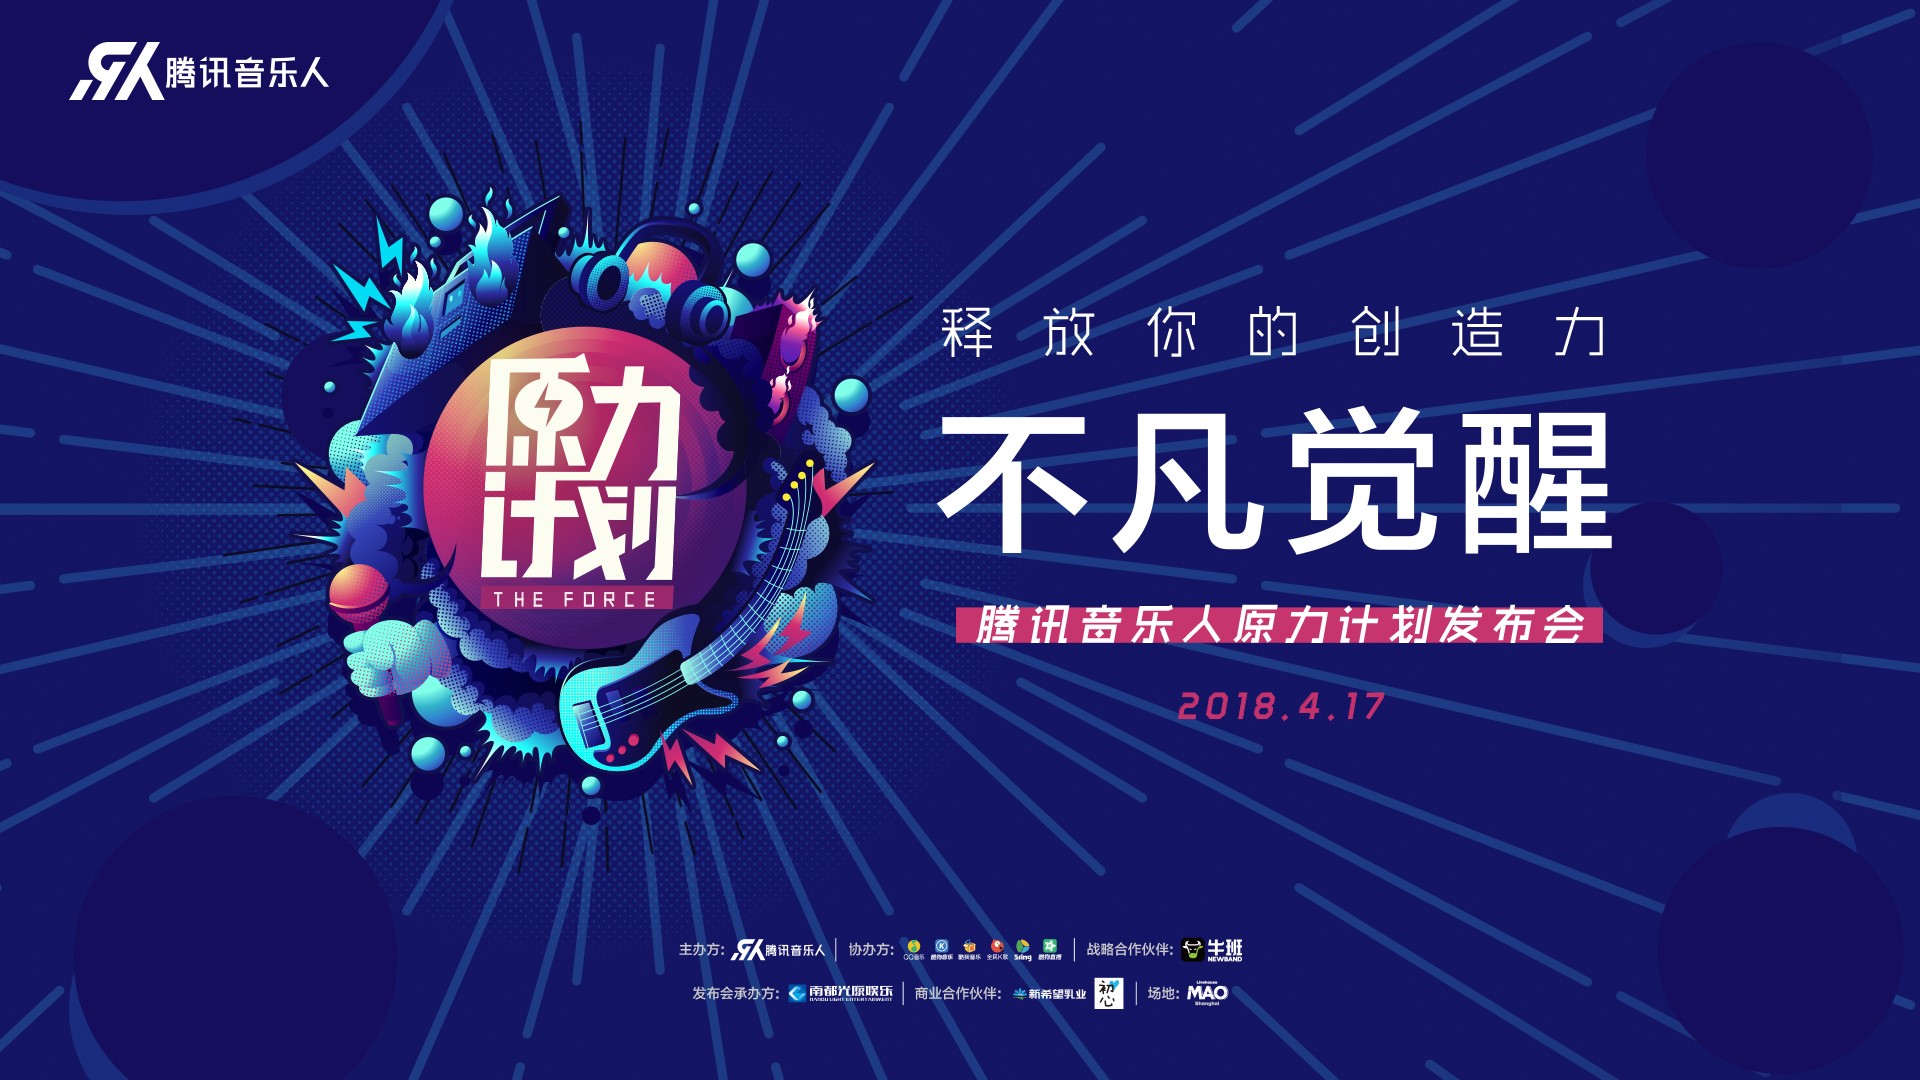 Tencent Musician Program launches The Force